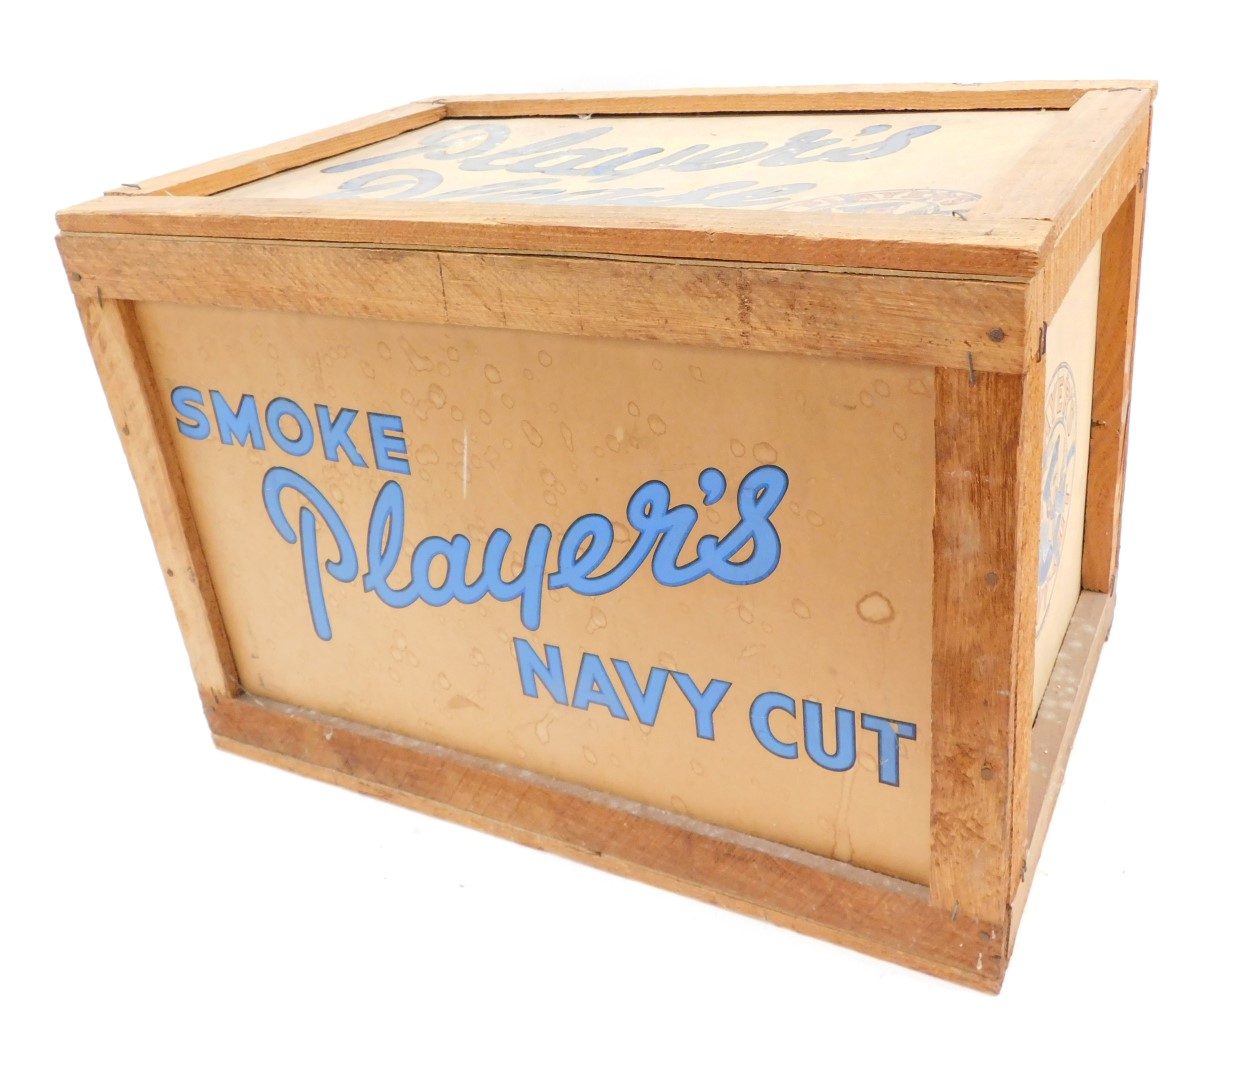 A Smoke Players Navy Cut replica trunk, with applied painted decoration, 39cm high, 58cm wide, 39.5c